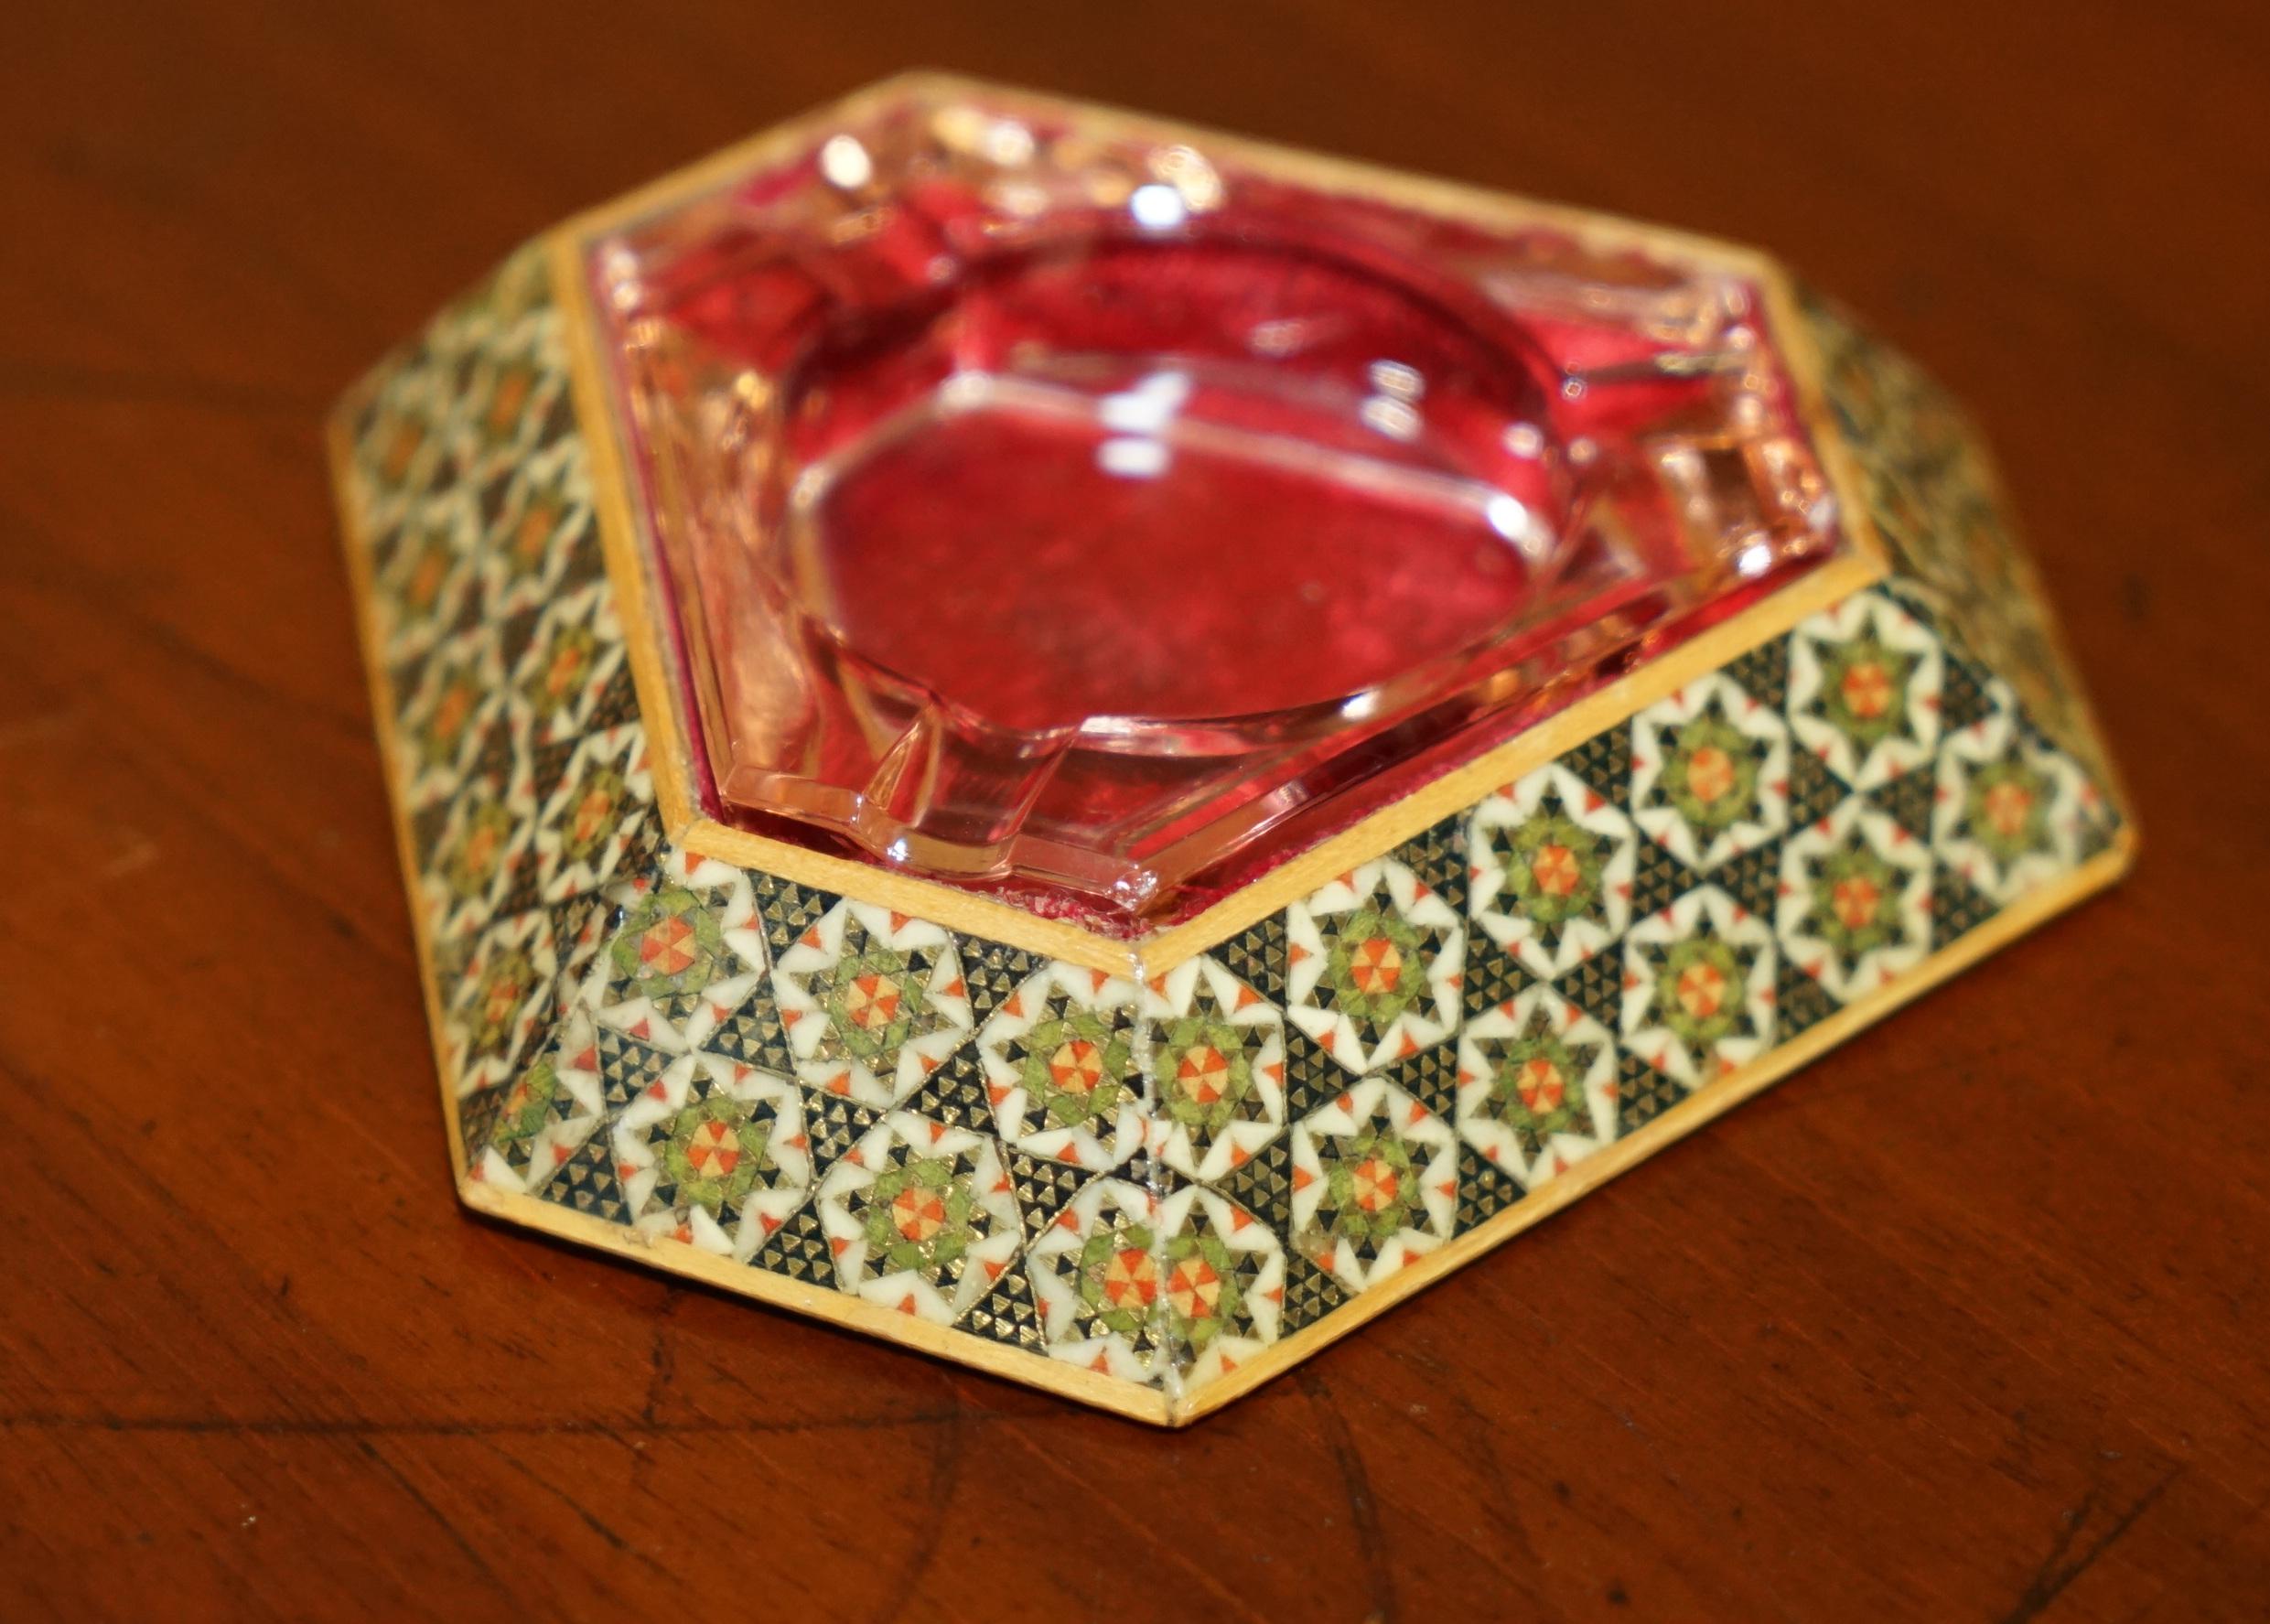 European ANTIQUE PERSIAN ASHTRAY WiTH CRANBERRY GLASS TRIANGLE INTERNAL TRAY For Sale